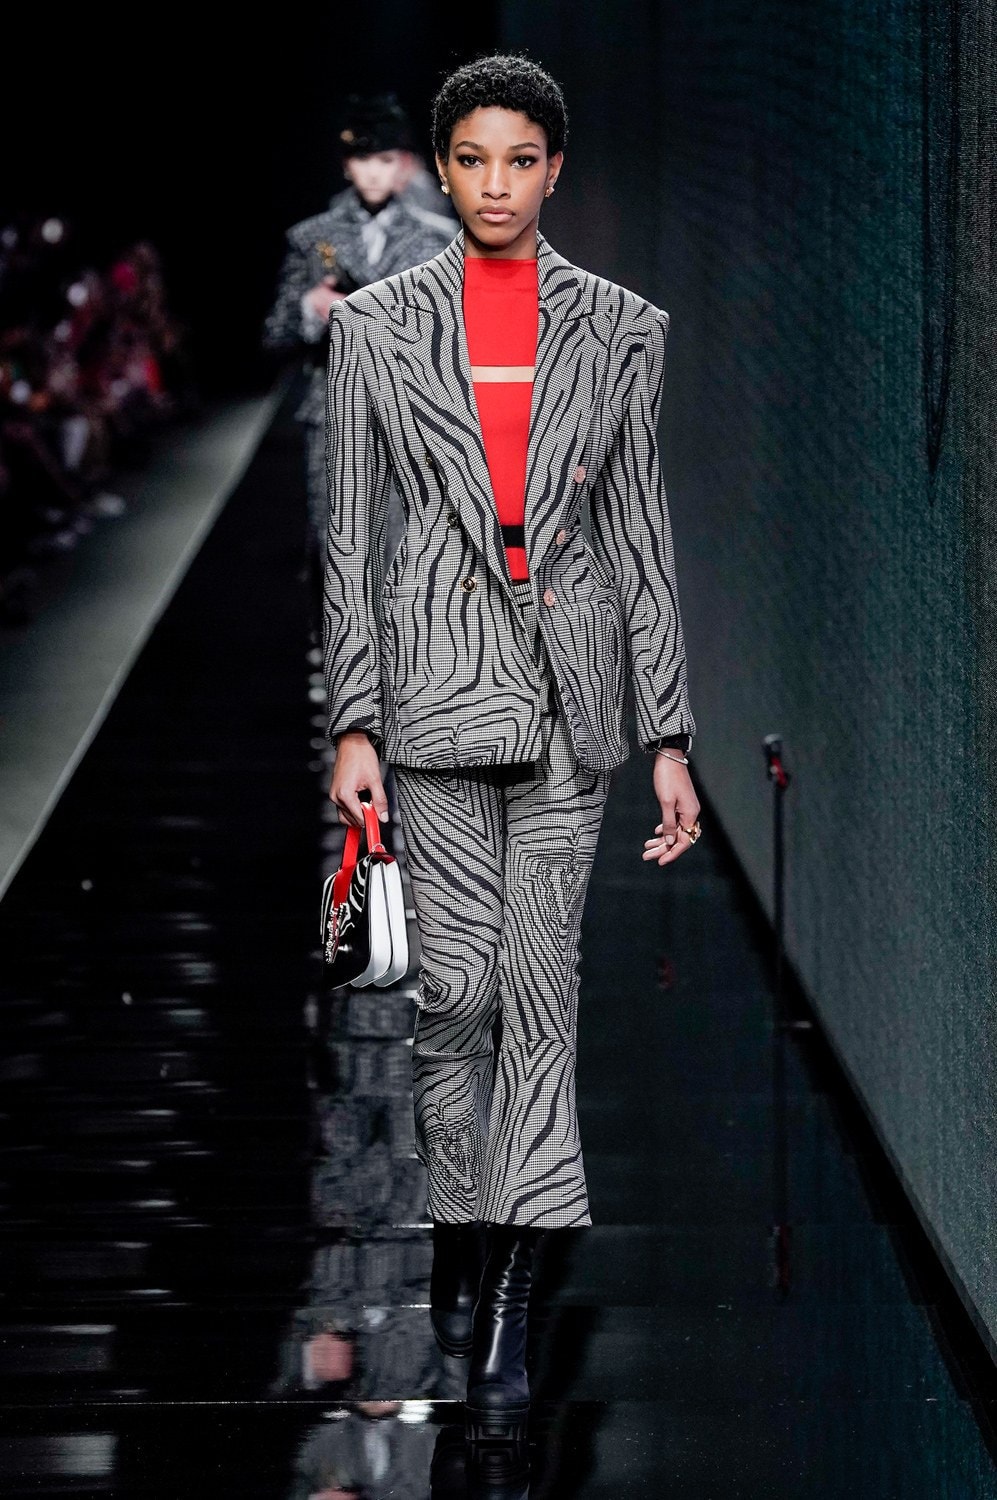 Versace Fall/Winter 2020 Collection Runway Show Striped Suit Black White